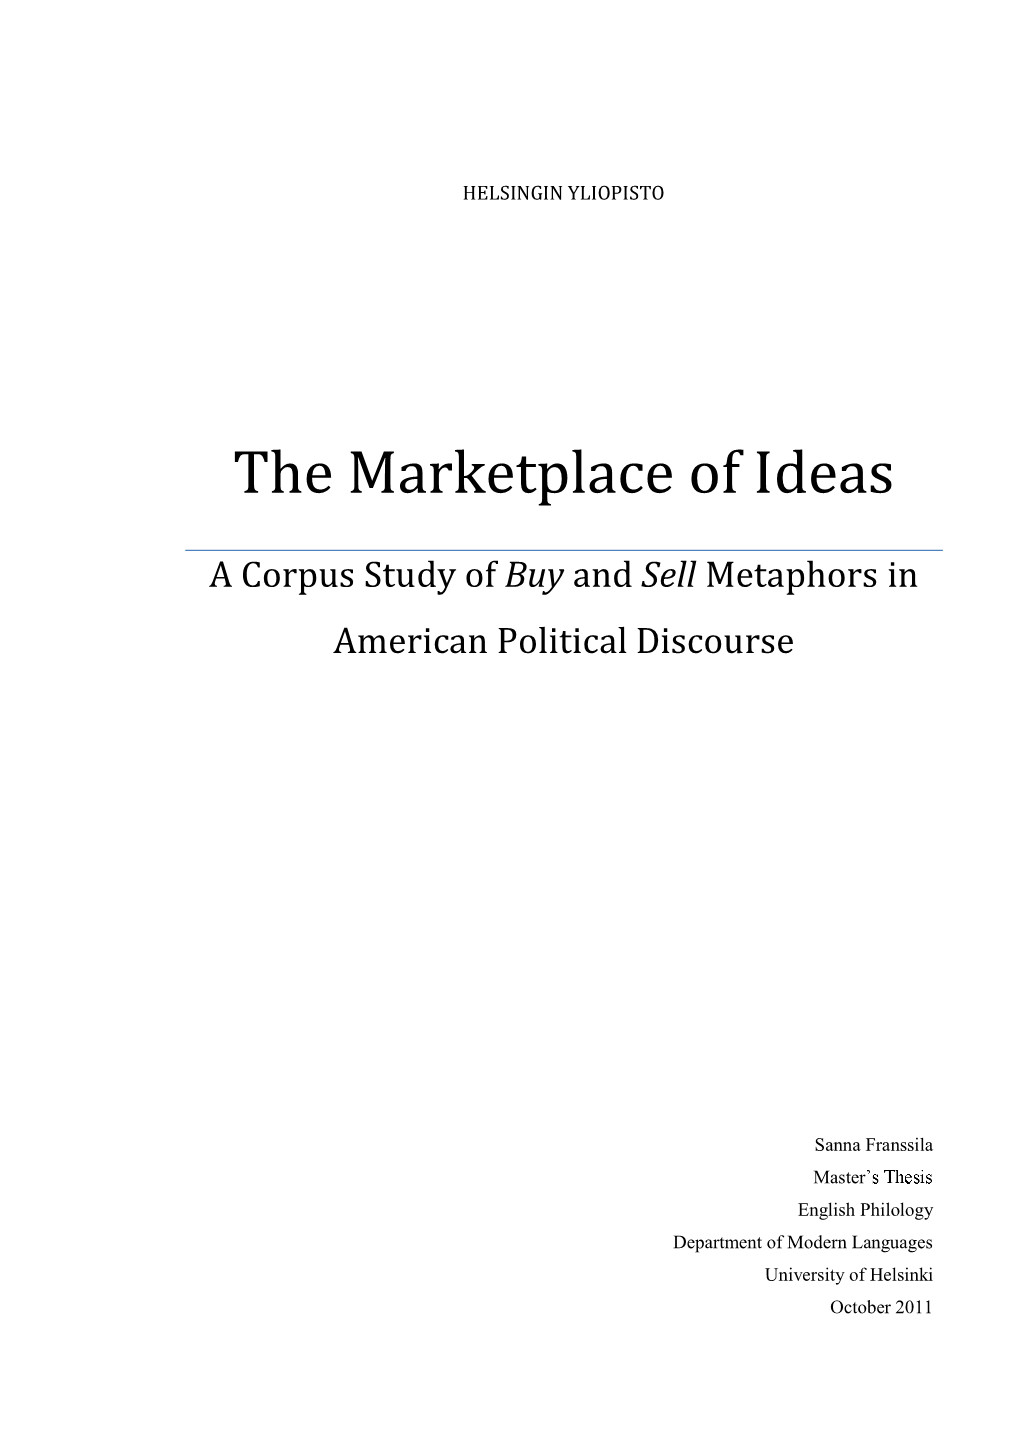 The Marketplace of Ideas